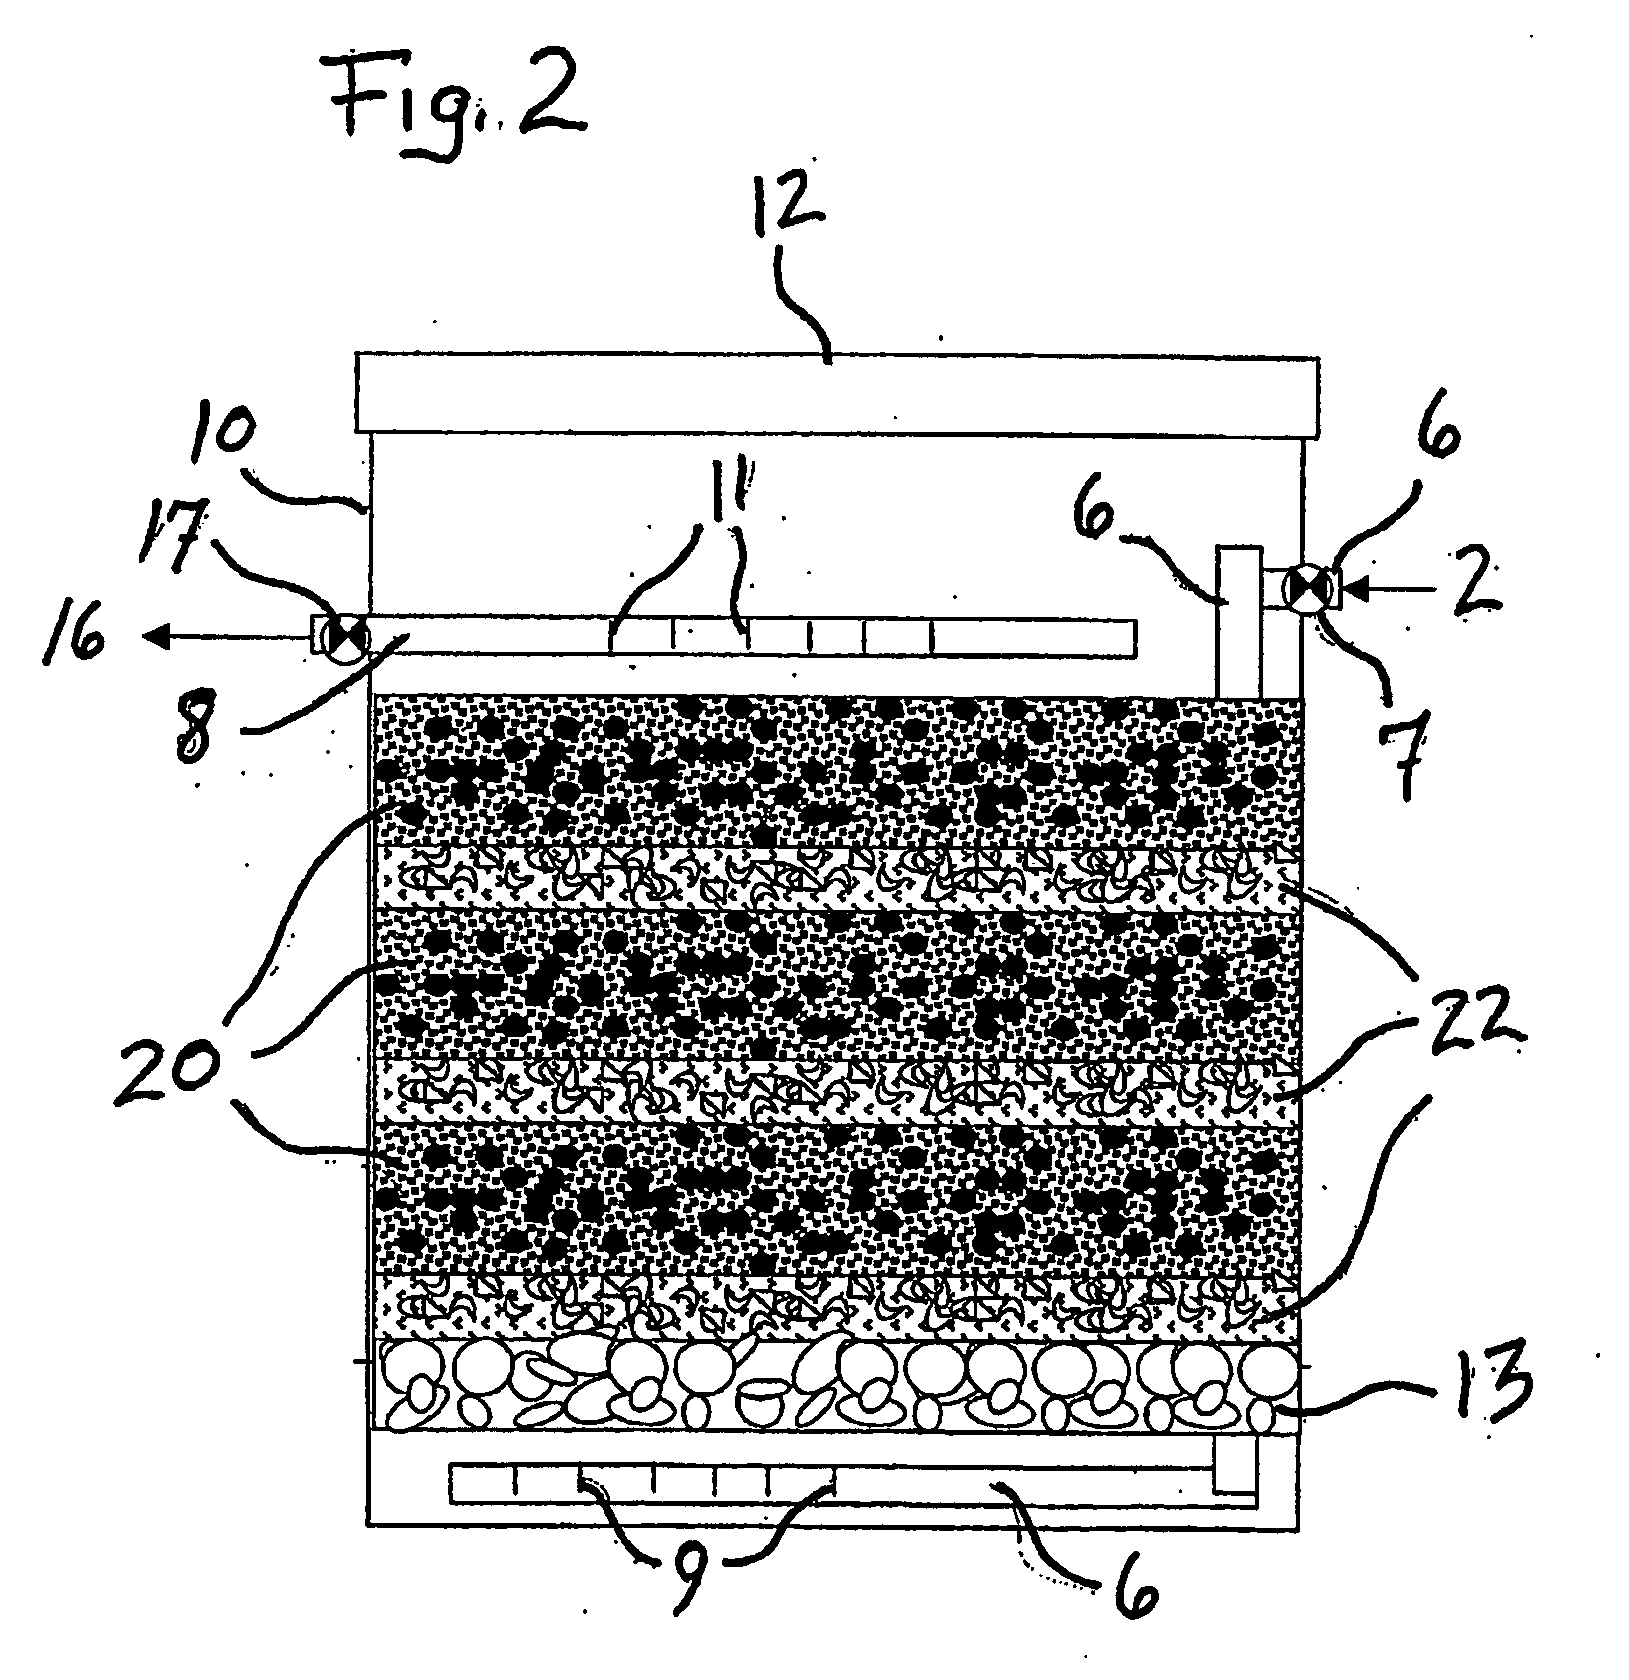 Process for autotrophic perchlorate reduction using elemental sulfur and mollusk shells